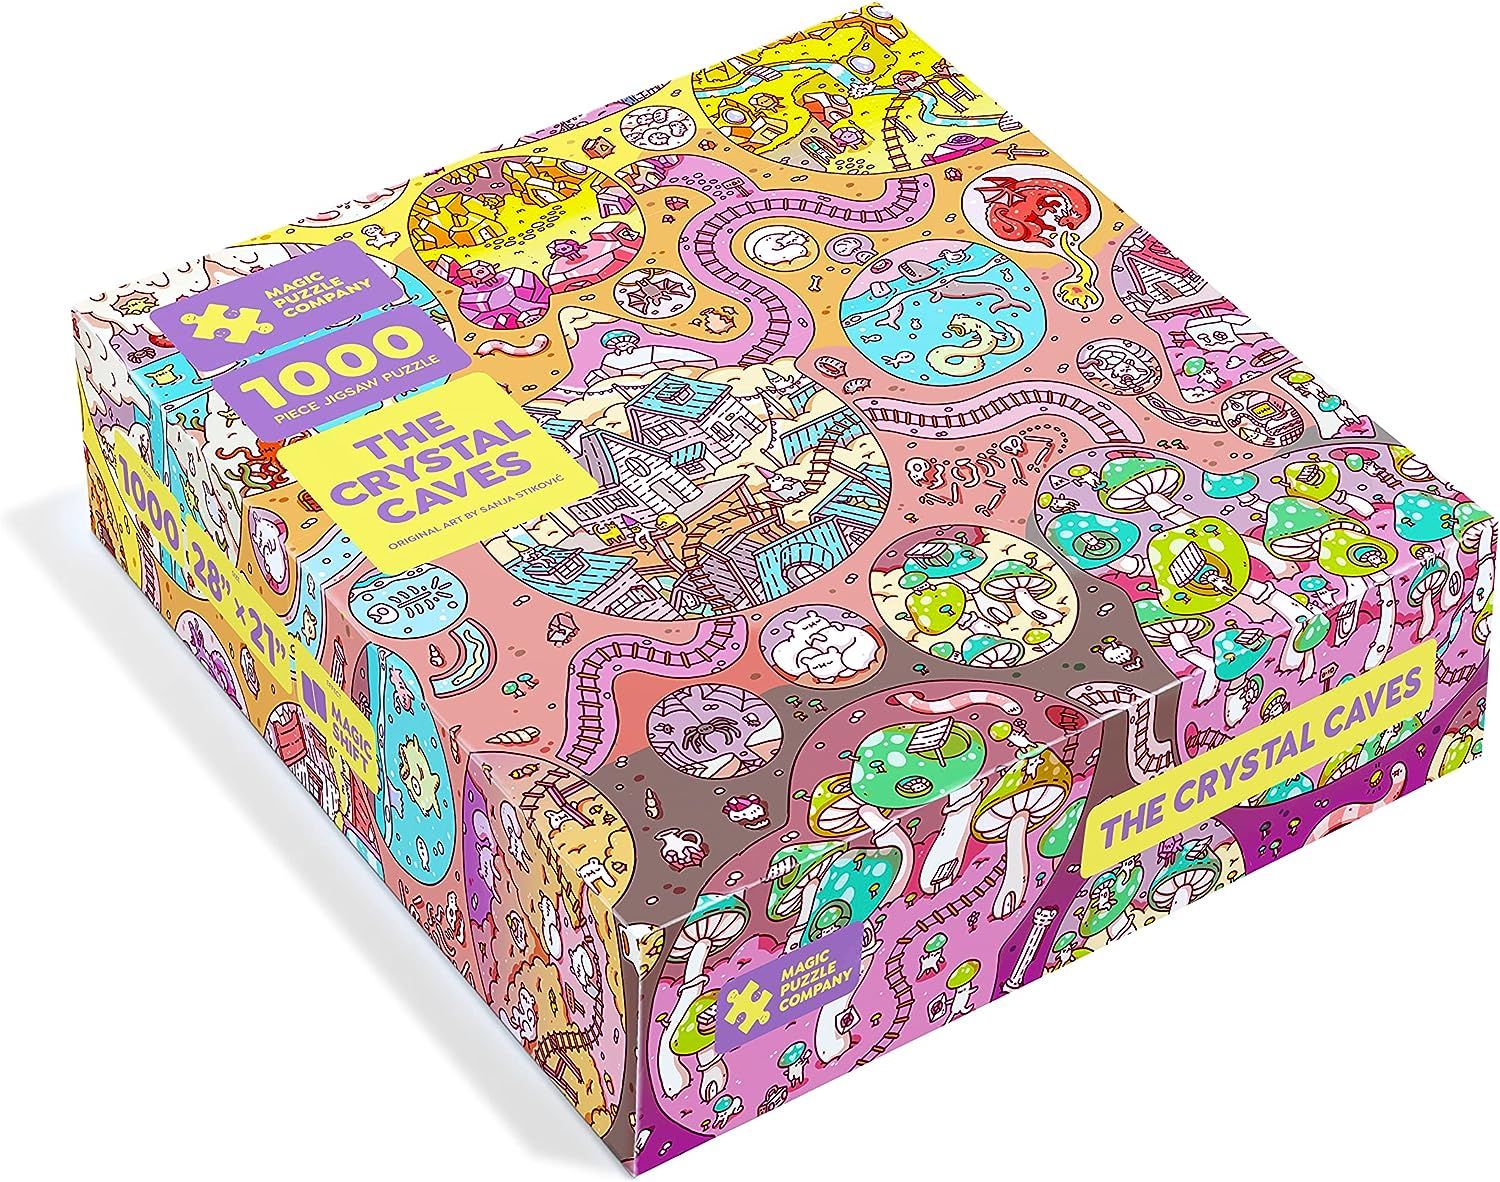 The Crystal Caves • 1000 Piece Jigsaw Puzzle from The Magic Puzzle Company • Series Two | Amazon (US)